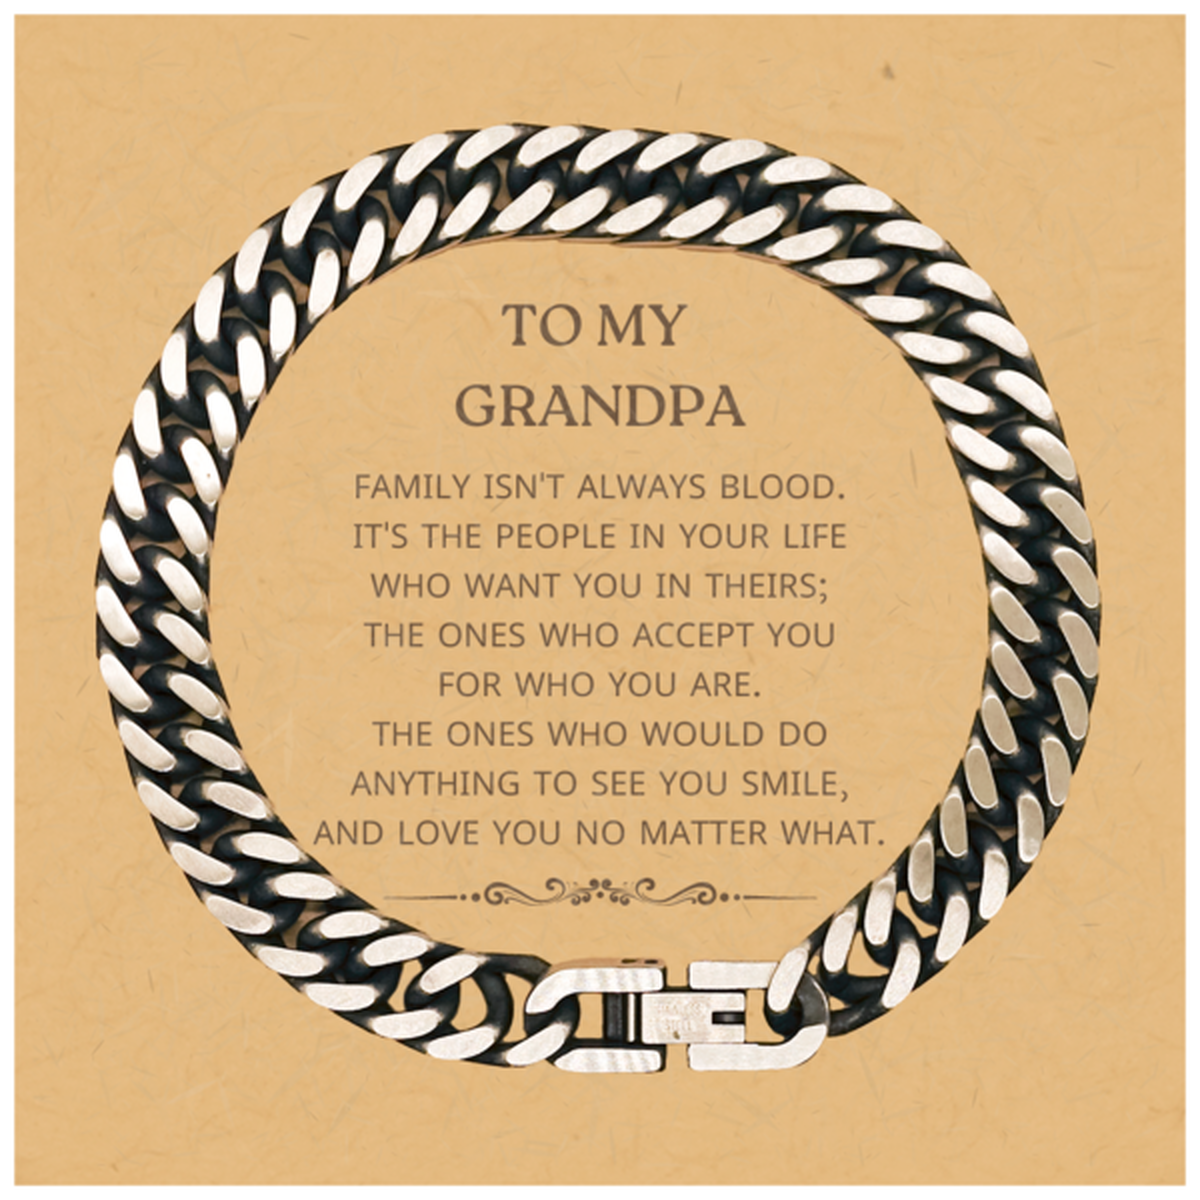 To My Grandpa Gifts, Family isn't always blood, Grandpa Cuban Link Chain Bracelet, Birthday Christmas Unique Present For Grandpa